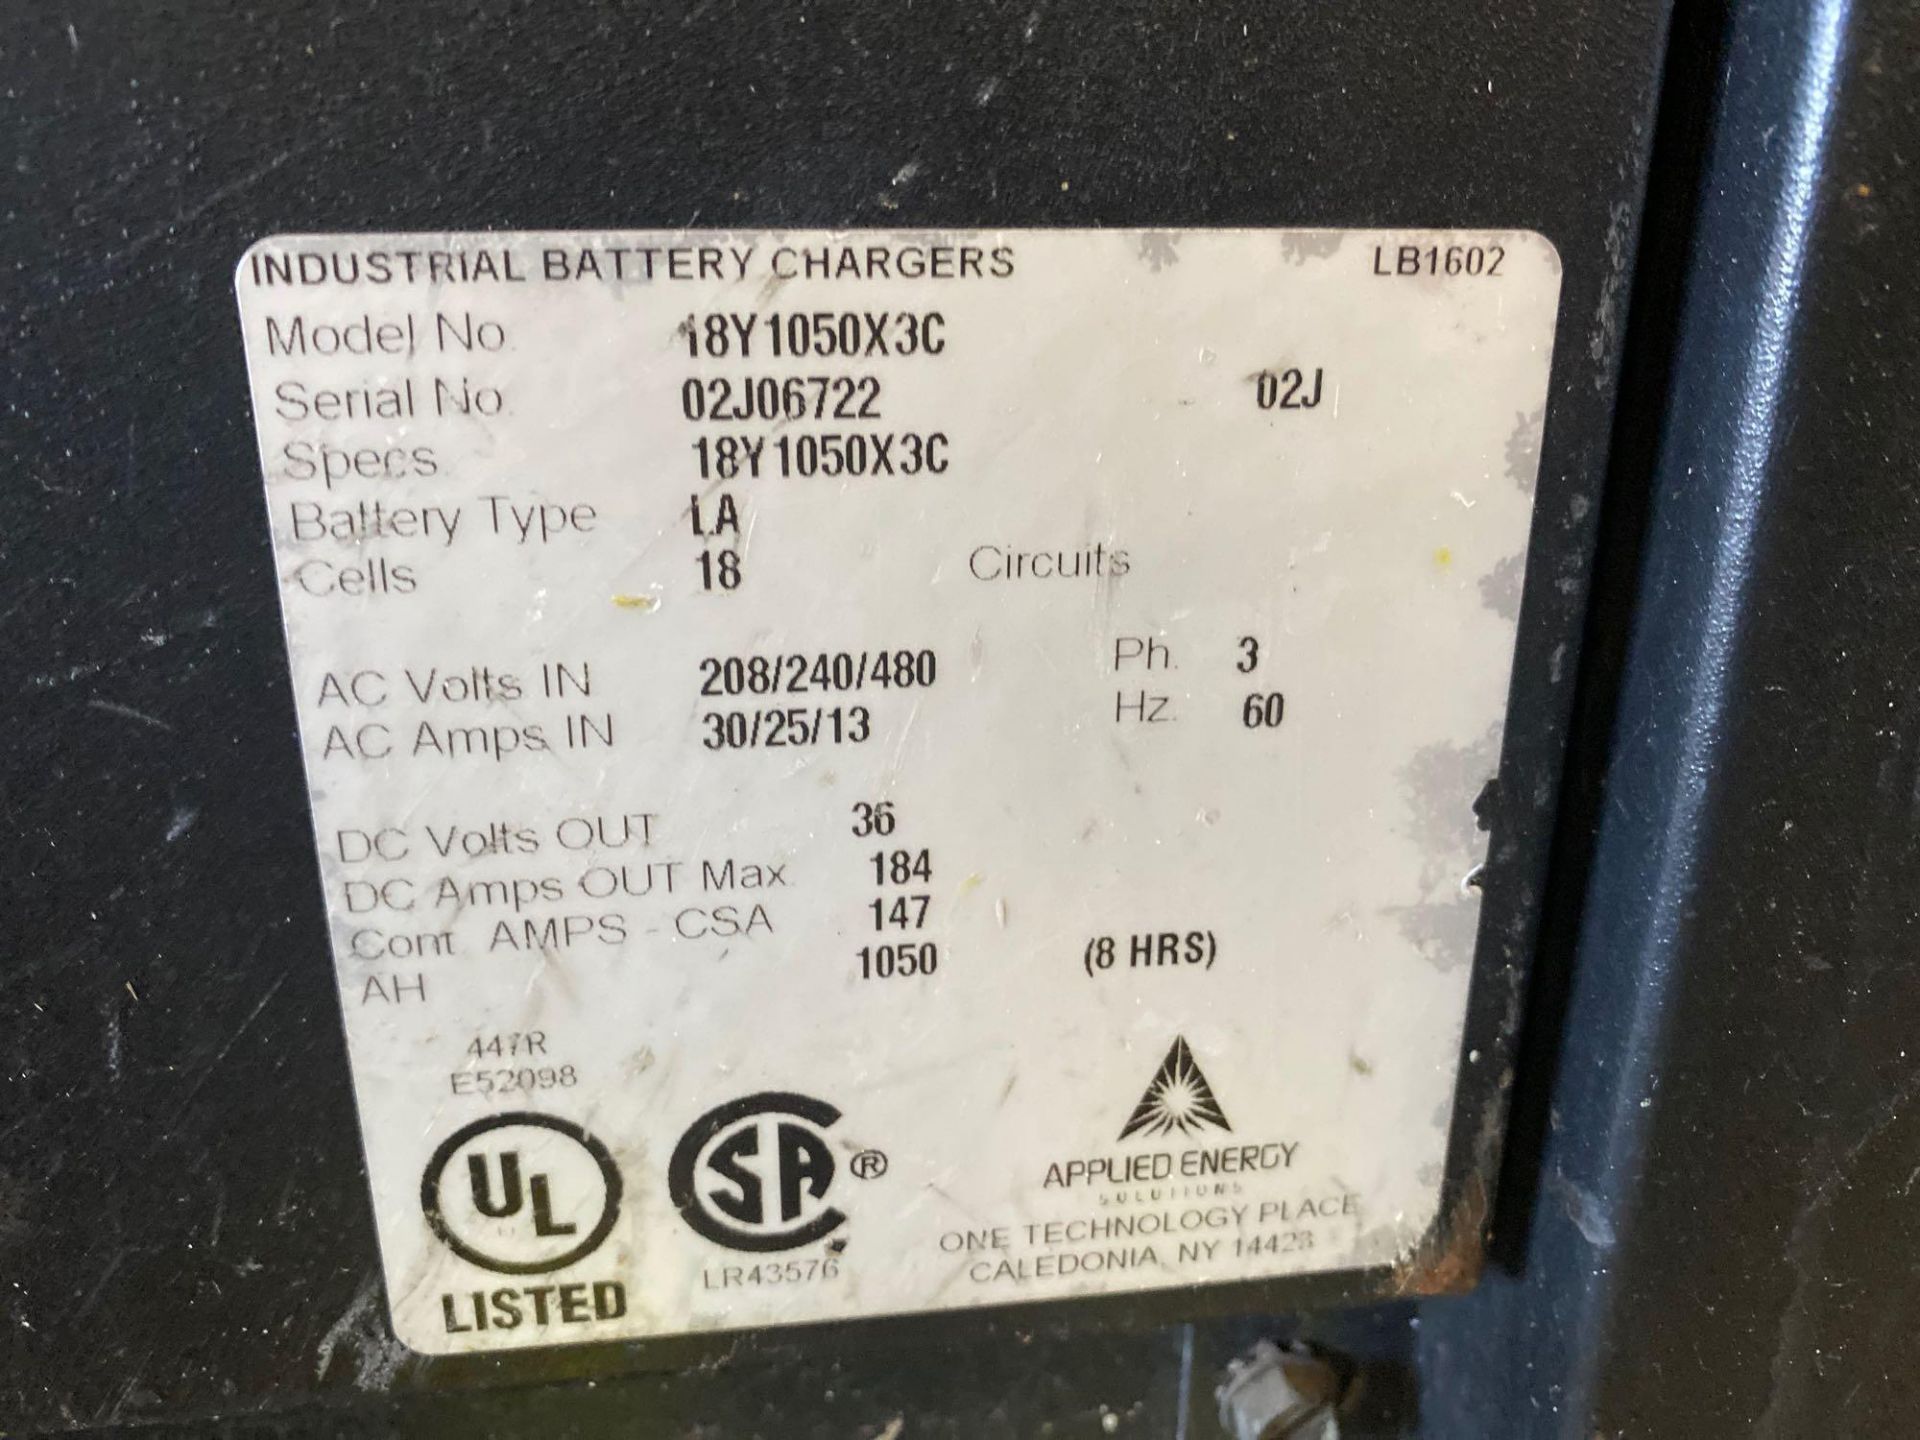 APPLIED ENERGY WORKHORSE SERIES 3 36V BATTERY CHARGER - Image 4 of 5